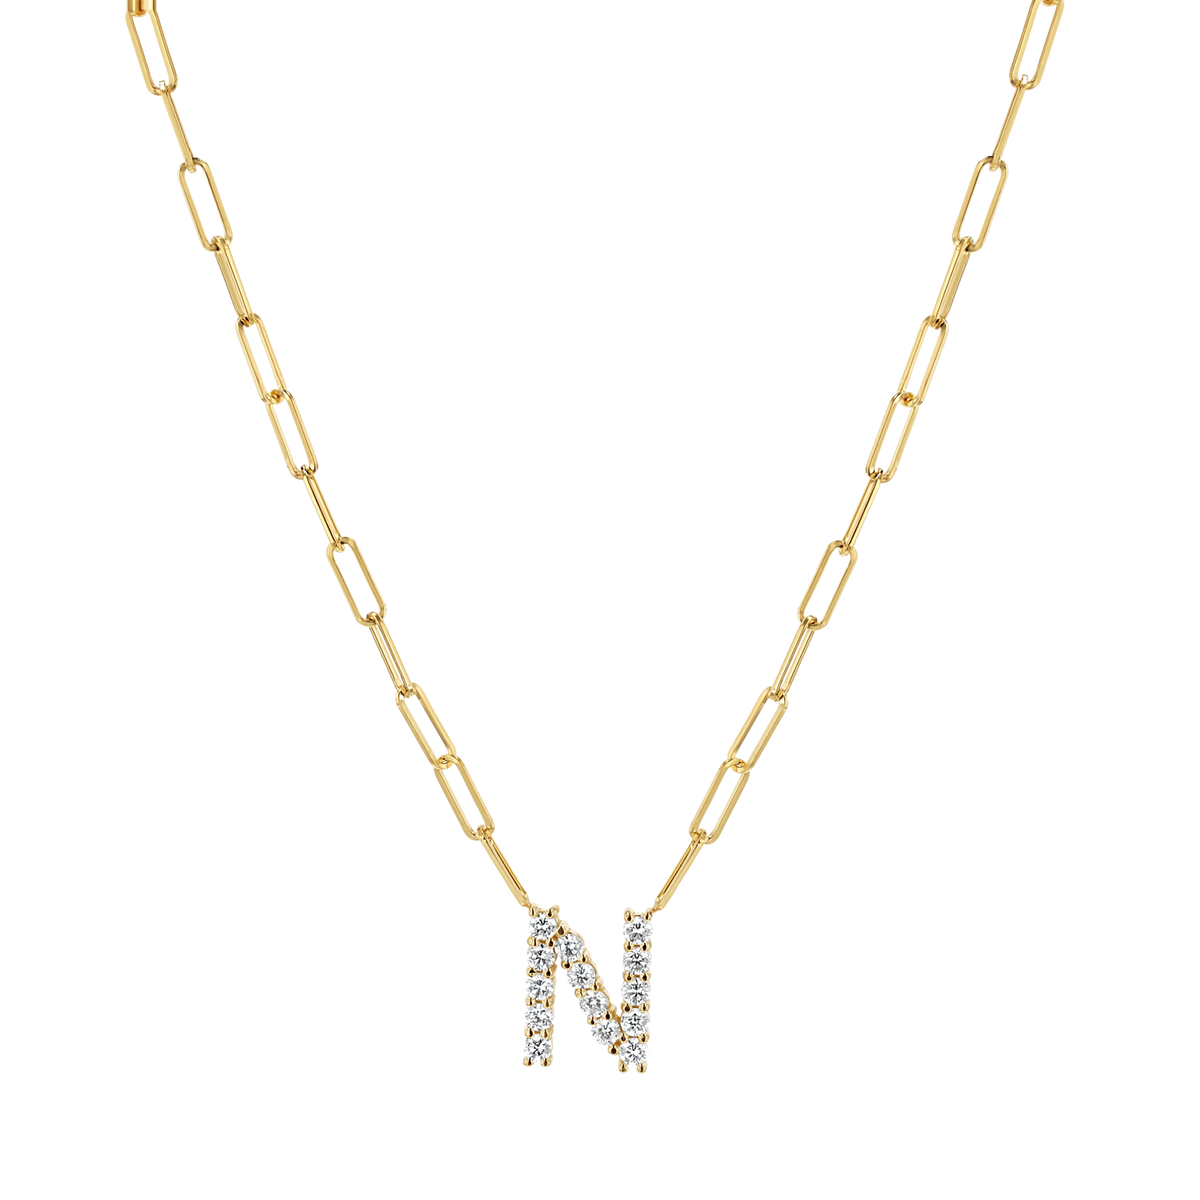 Paper Clip Link Custom Charm Necklace 14K Yellow Gold / 20 Inches by Baby Gold - Shop Custom Gold Jewelry